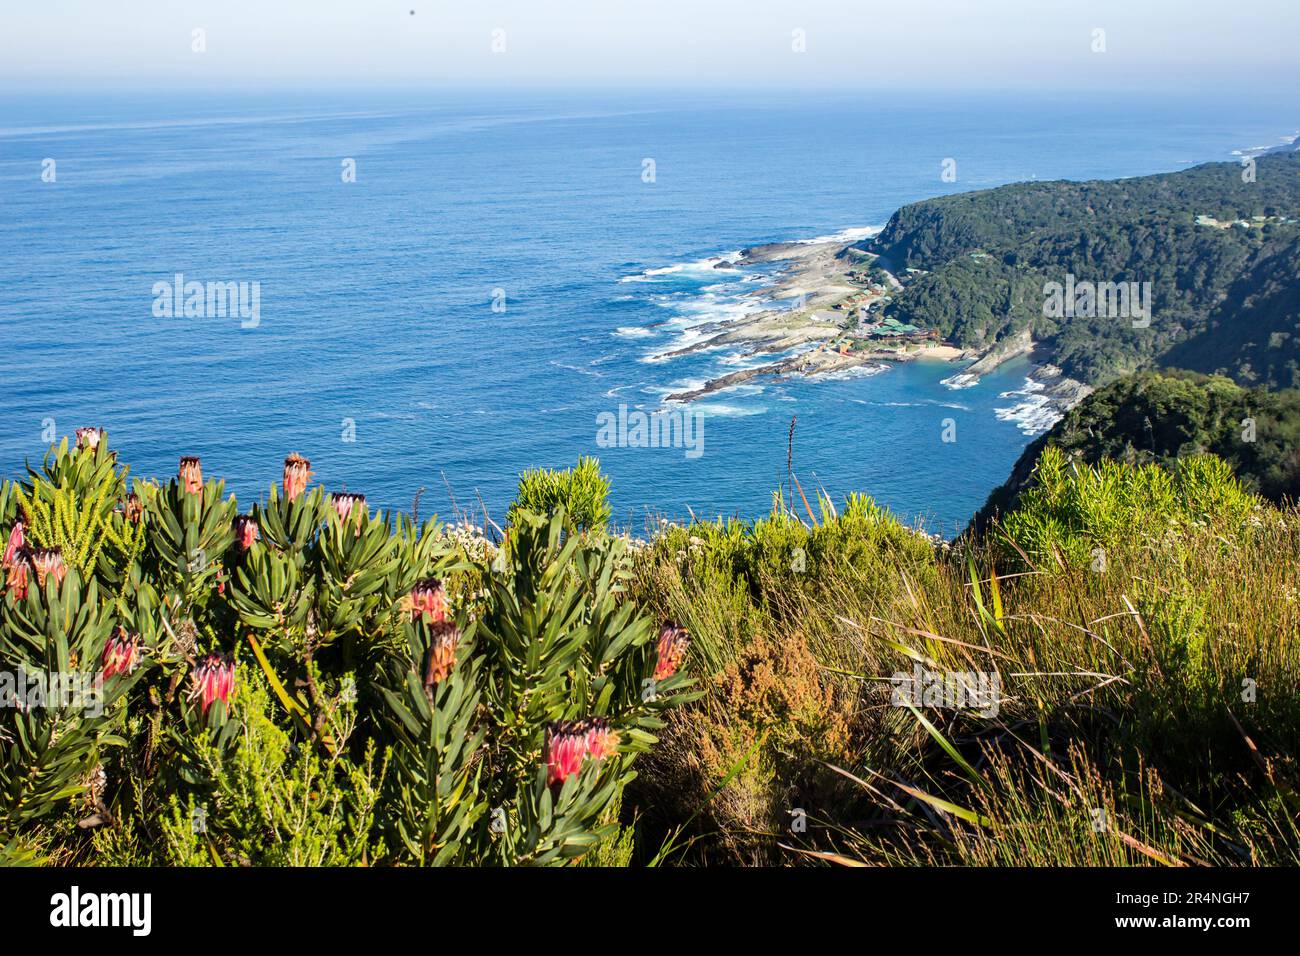 View along the Mountainous Tsitsikamma coast of South Africa, with an Oleander-leaf protea in bloom in the foreground Stock Photo